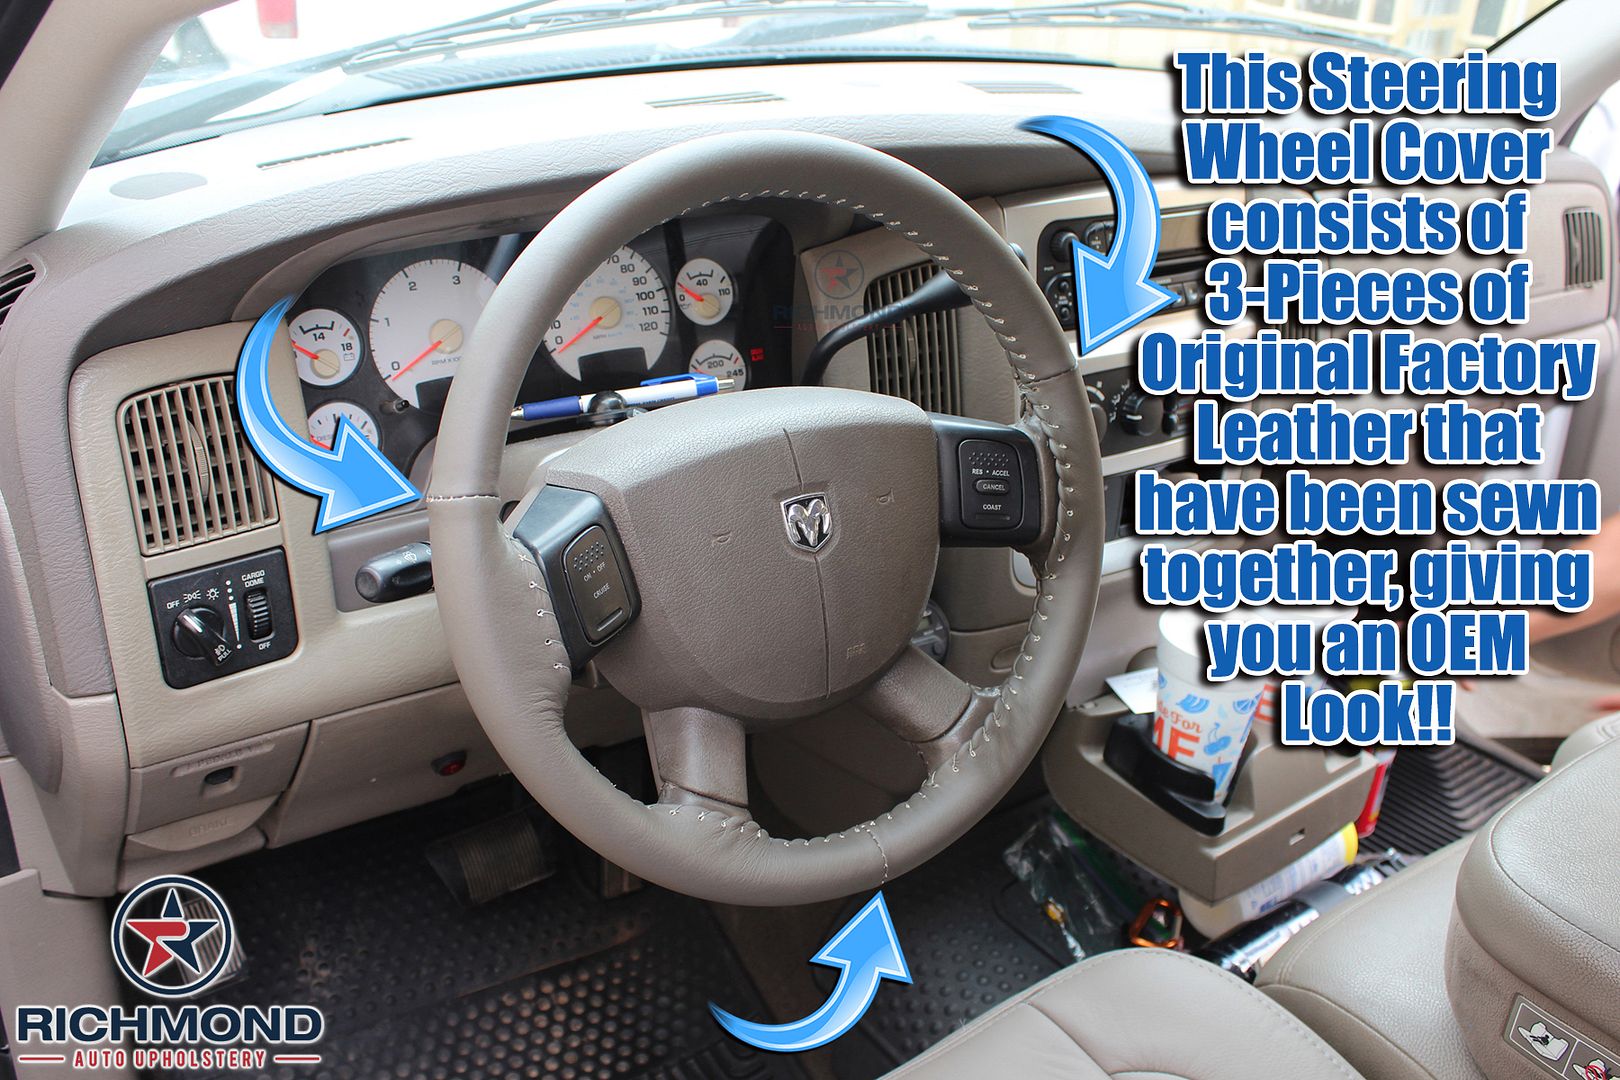 Details About For 07 08 Dodge Durango Dark Tan Leather Steering Wheel Cover W Needle Thread